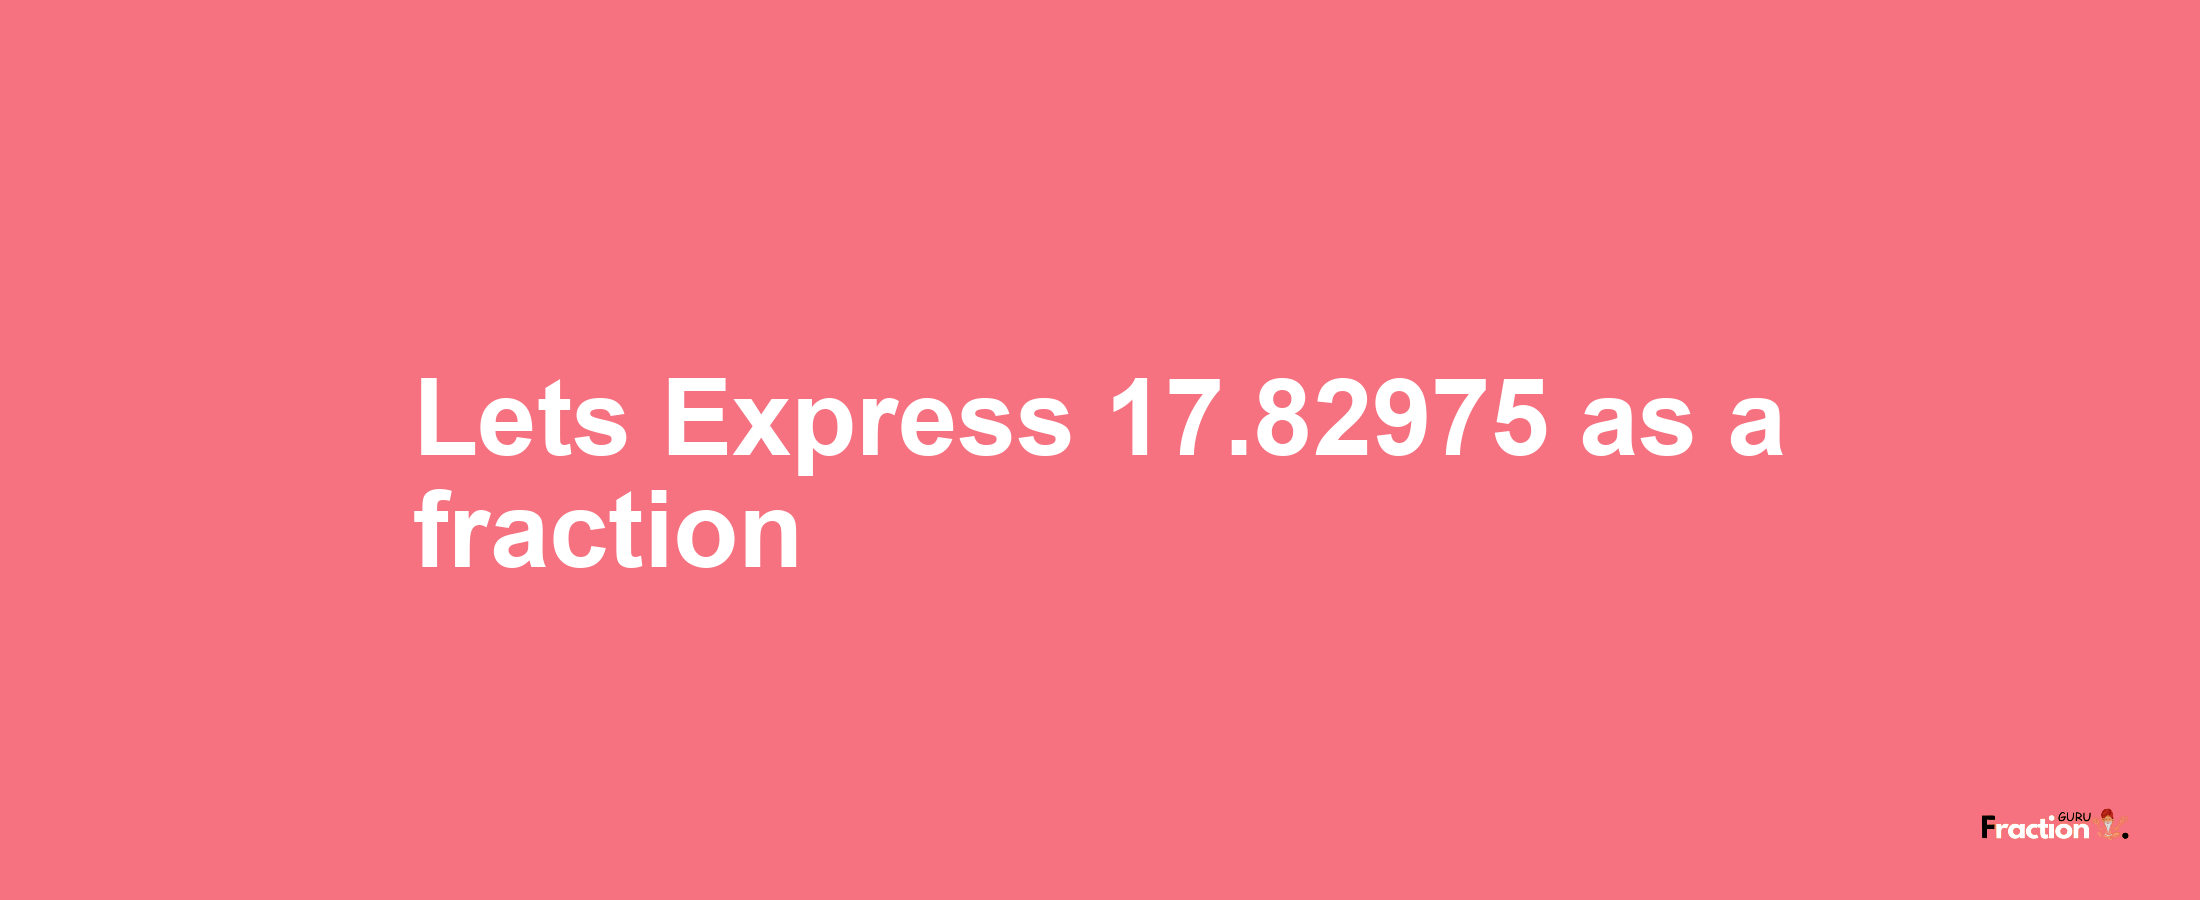 Lets Express 17.82975 as afraction